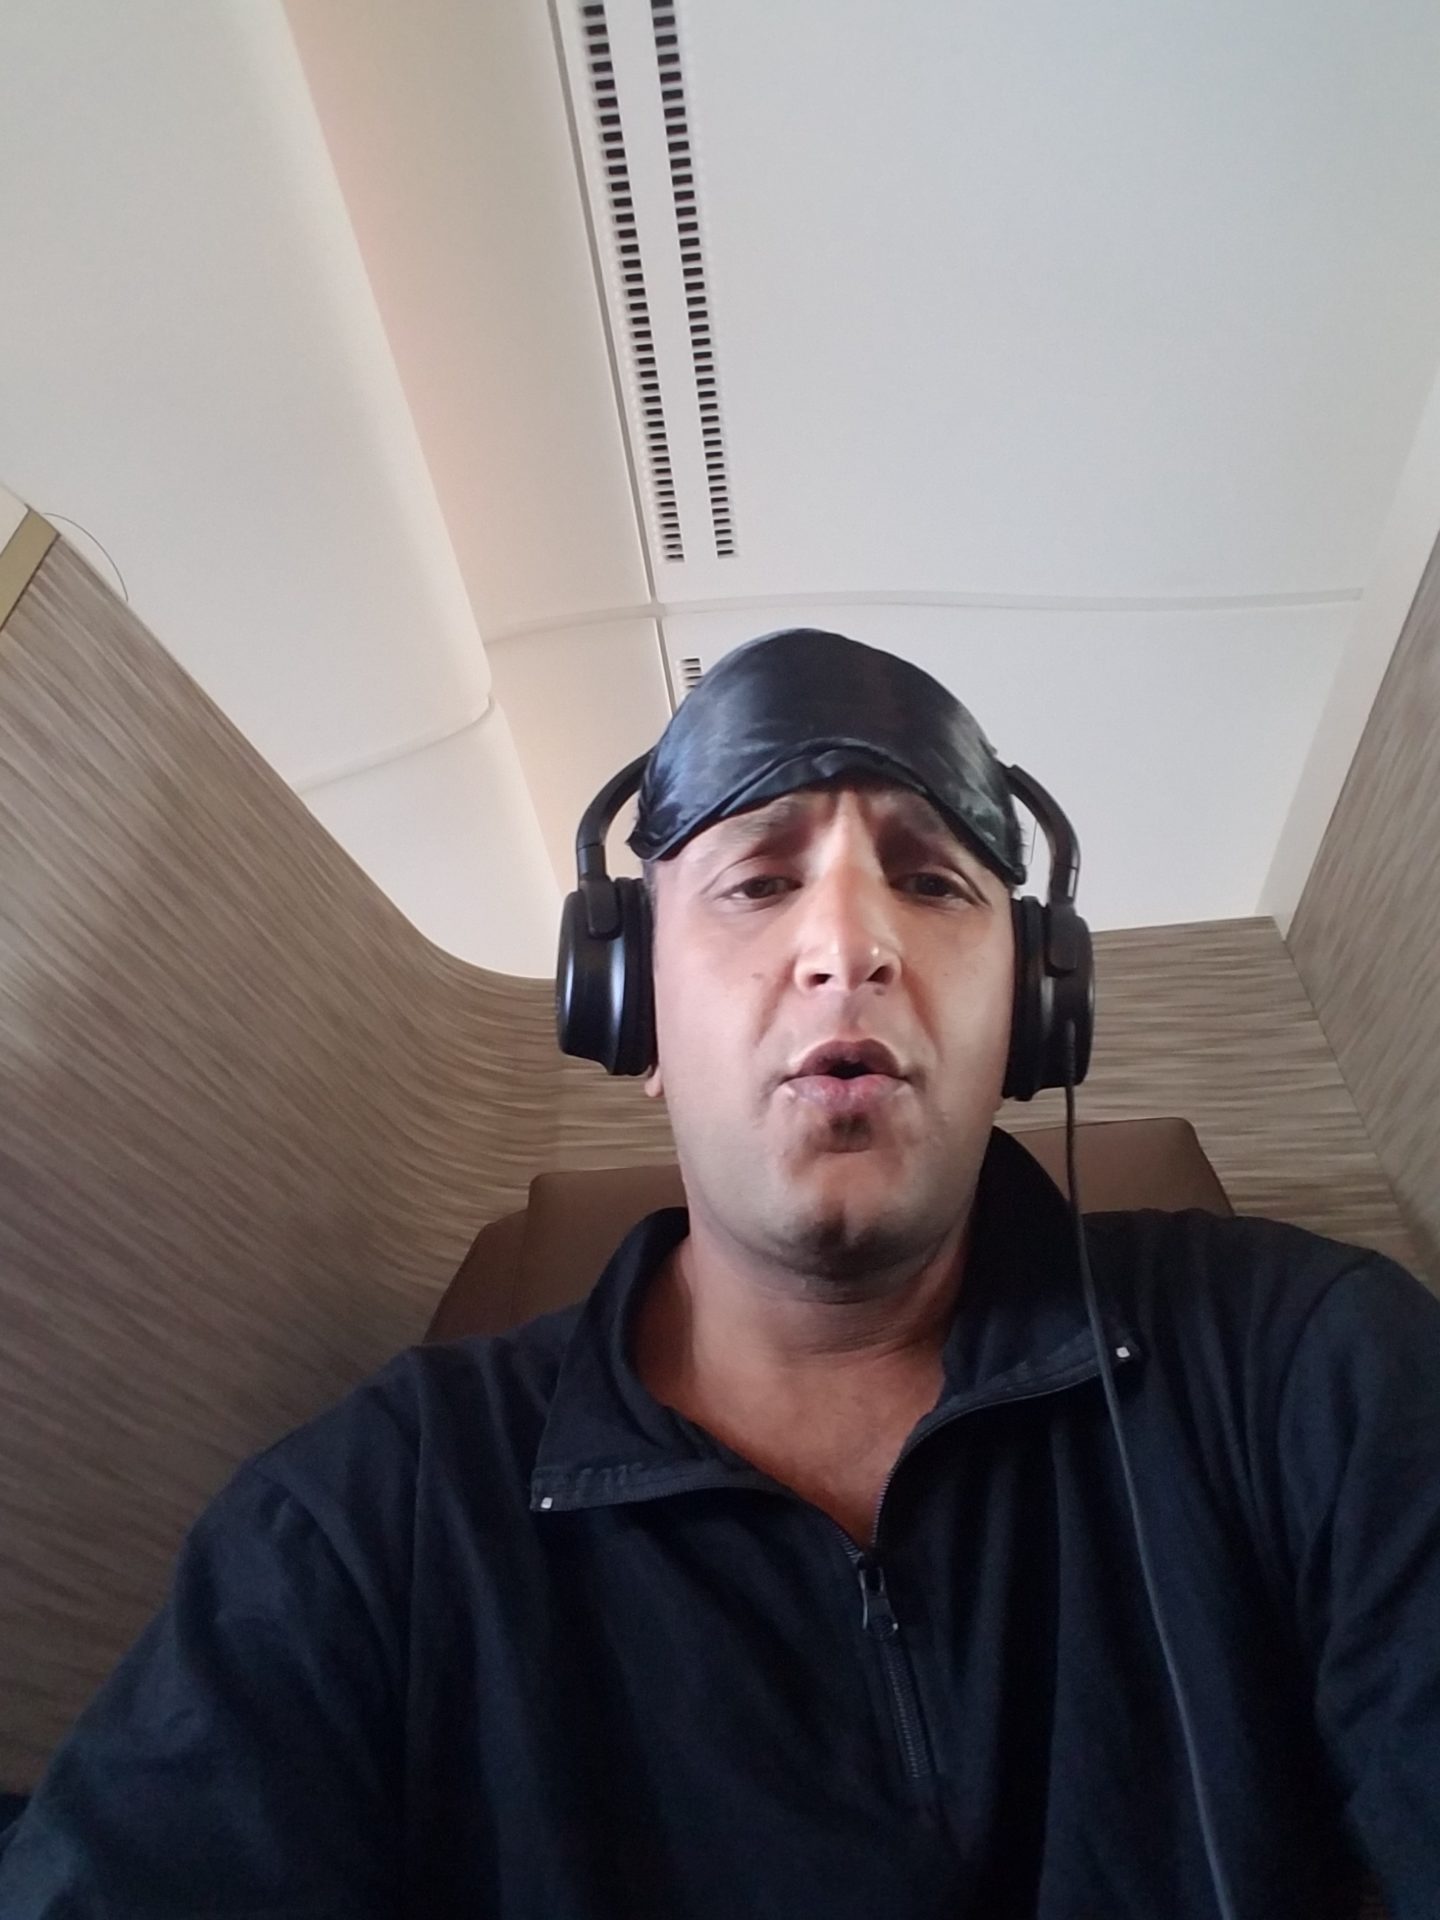 a man wearing headphones and a sleeping mask